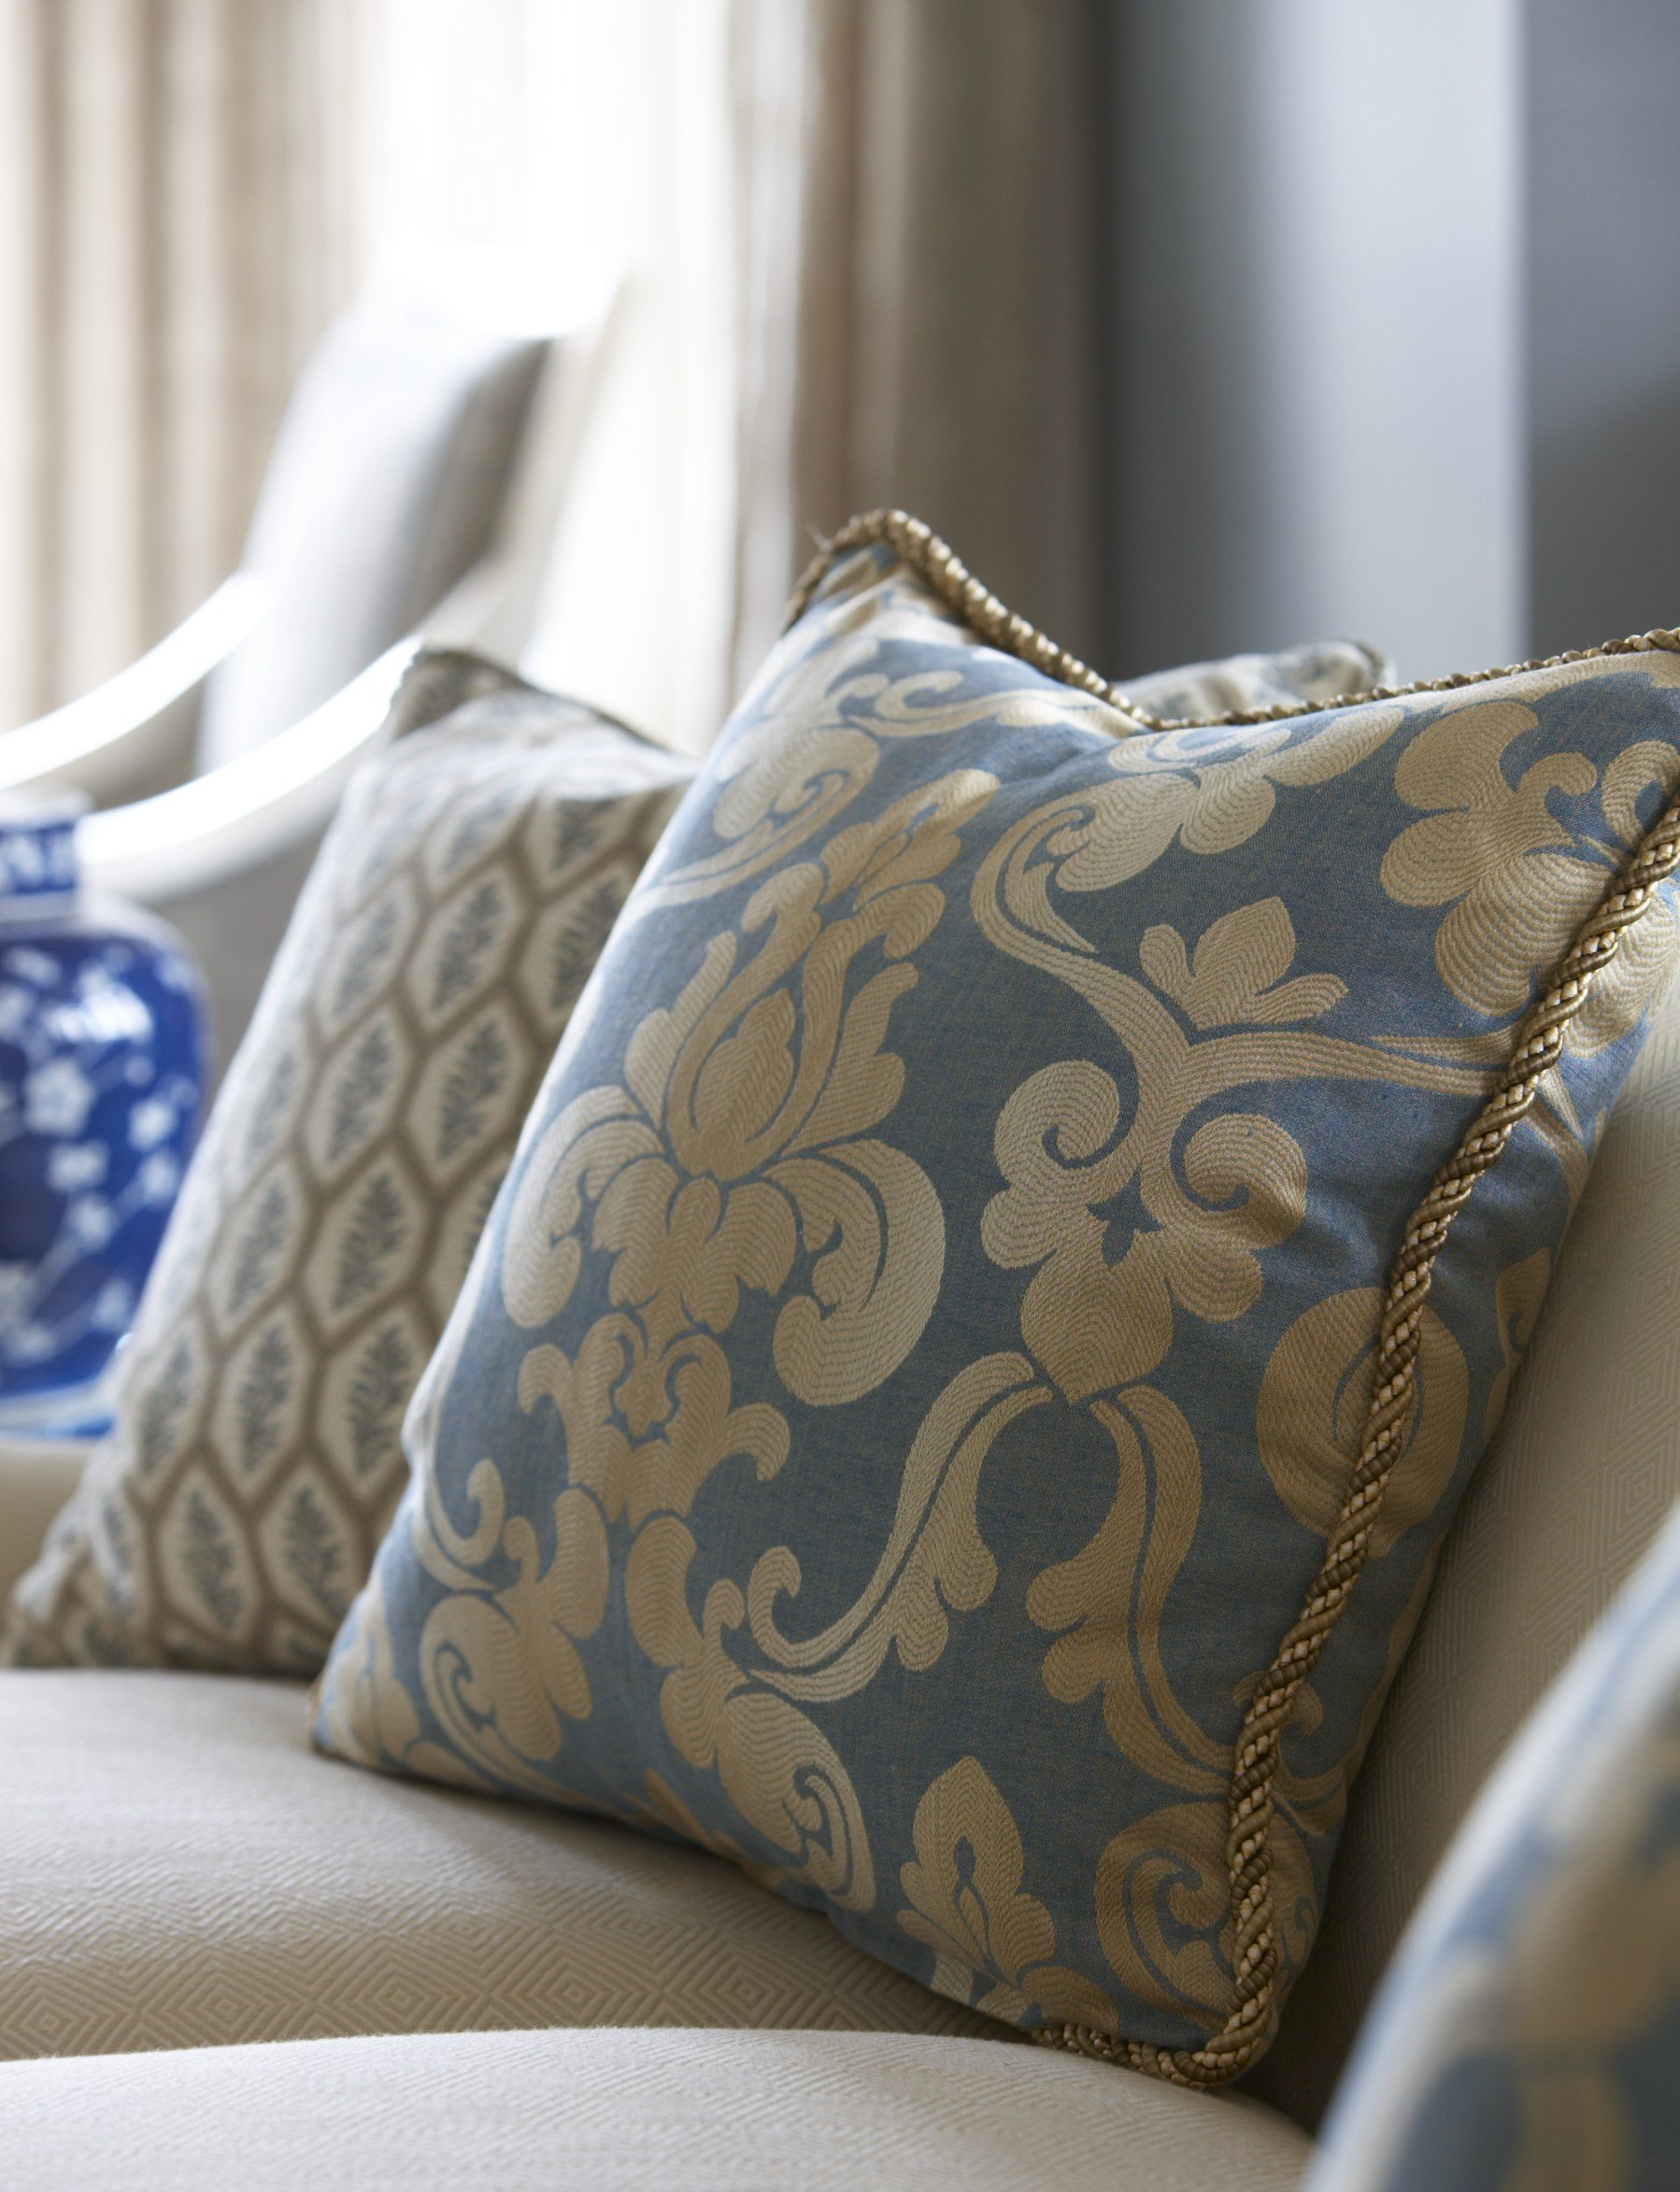 5-gold-blue-throw-pillow-detailed-patterned-jacobean-country-house-rinfret-interior-designs.jpg